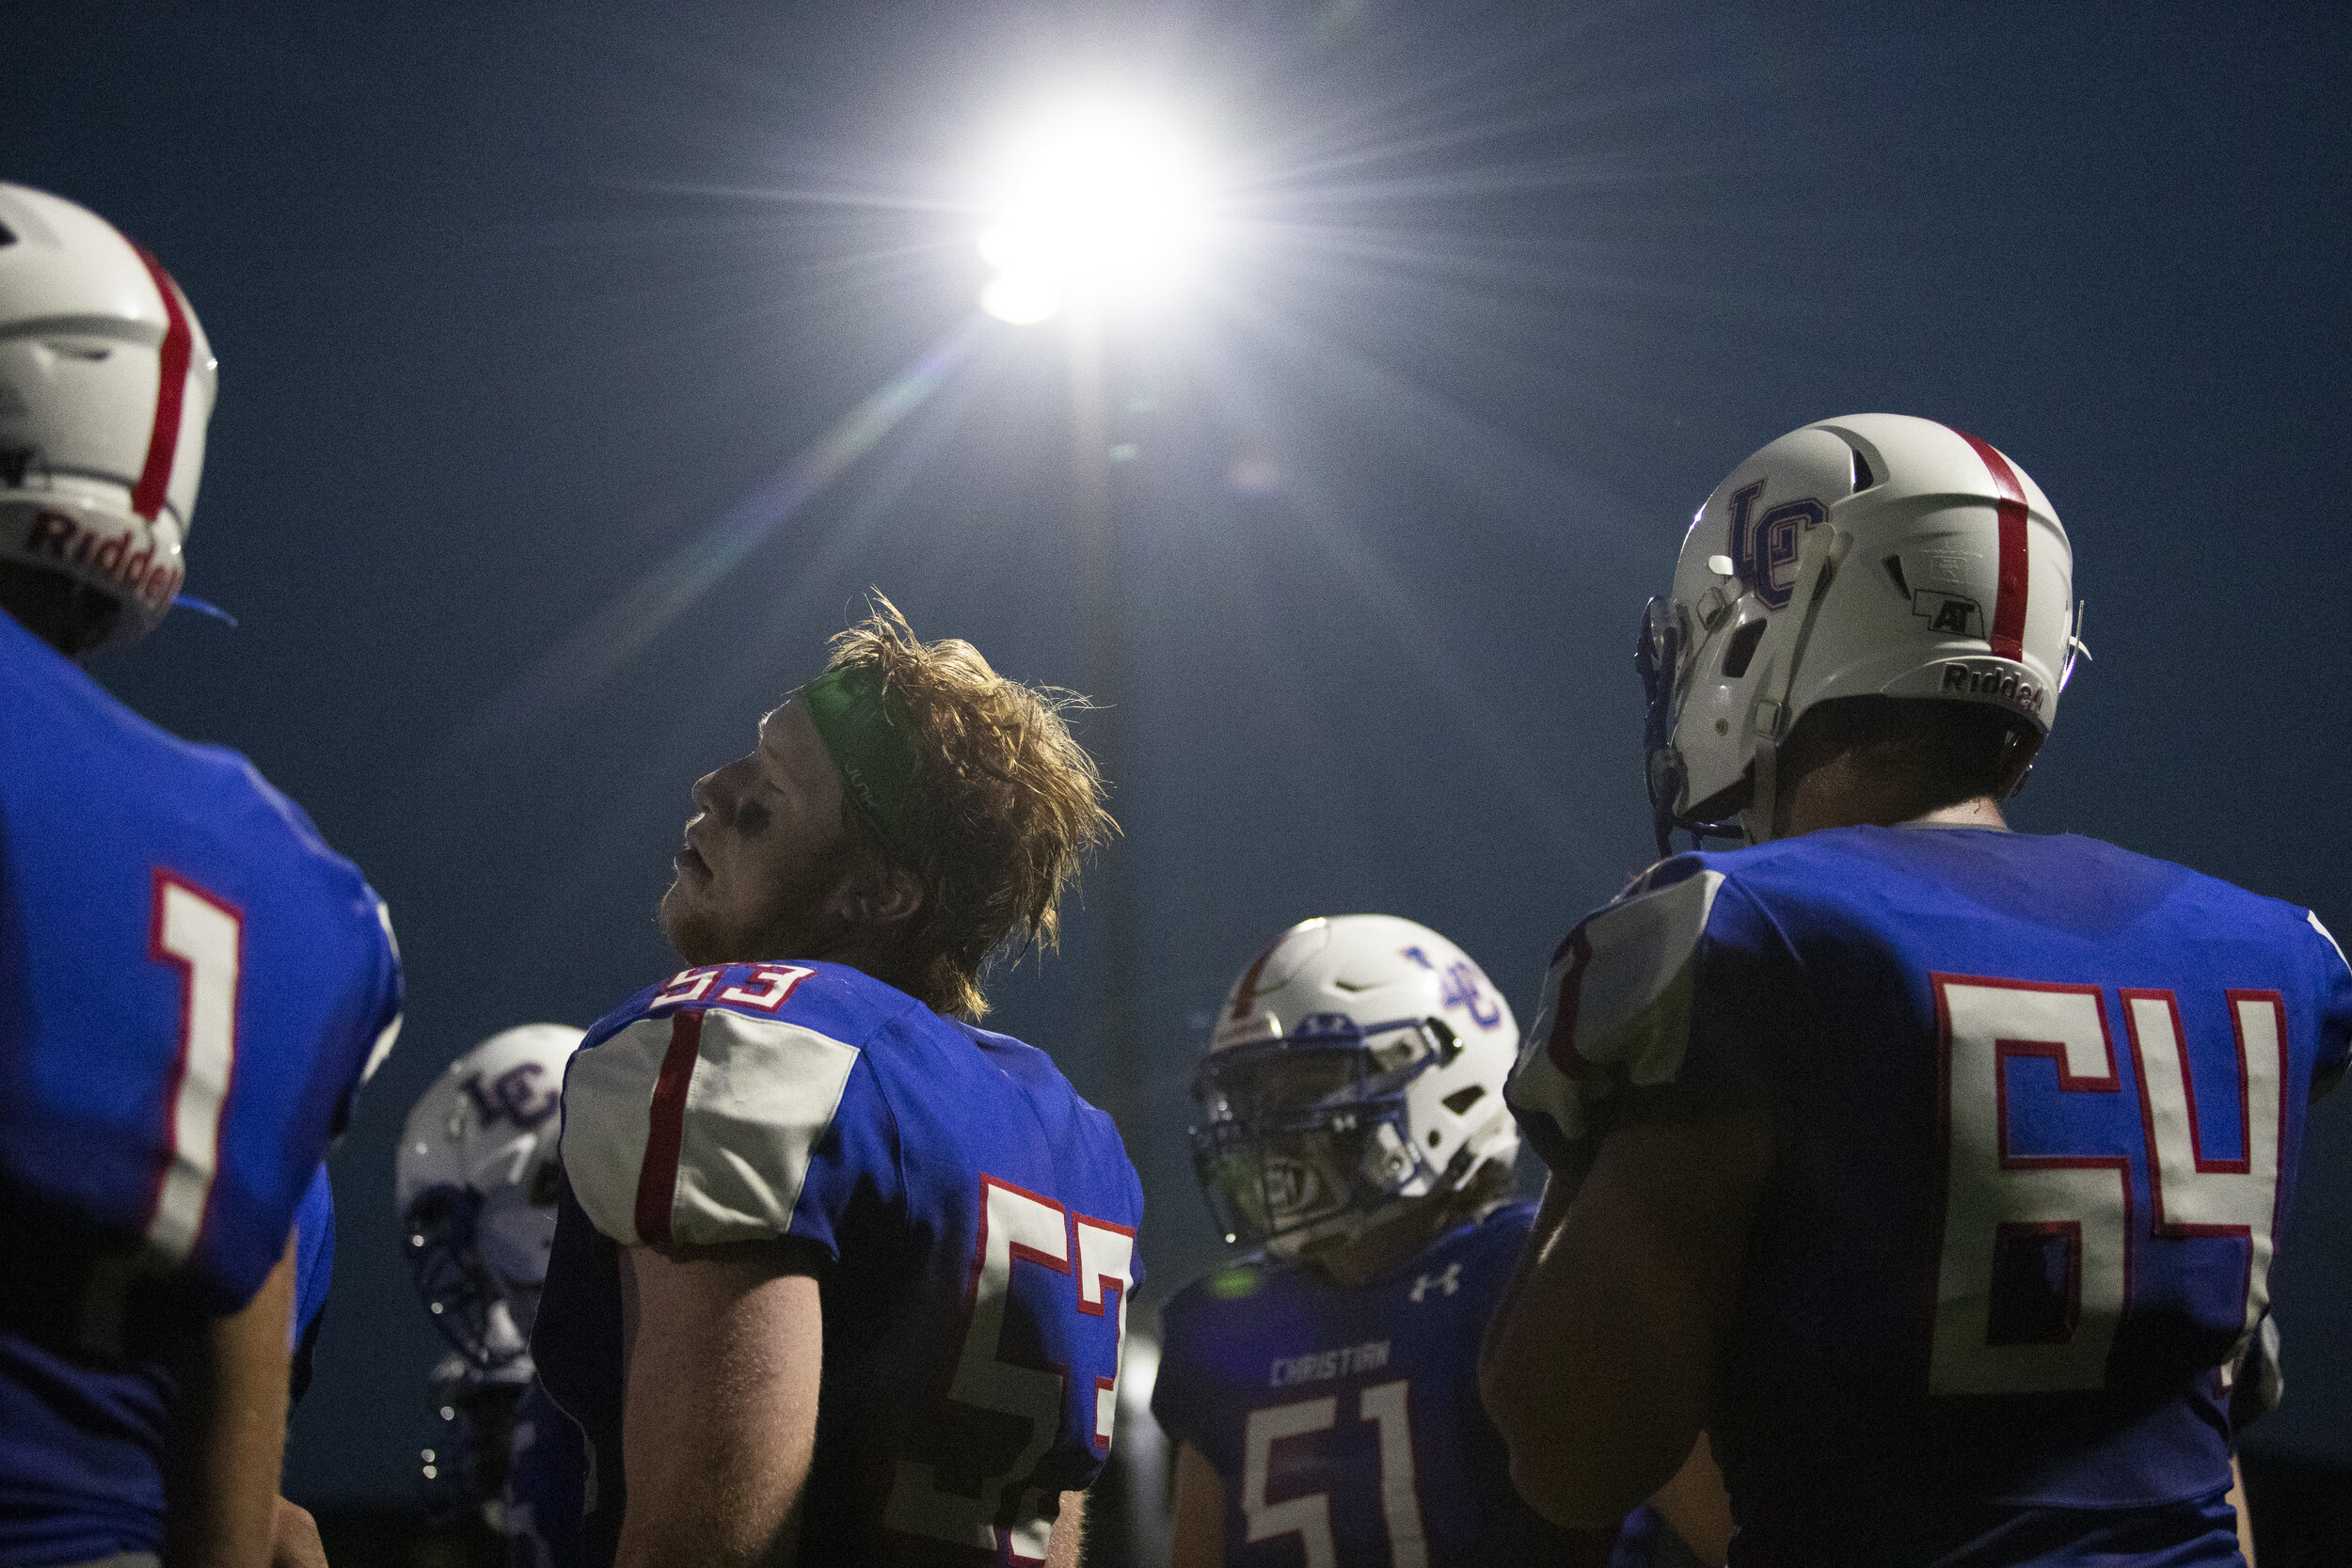  Lincoln Christian's Jackson Emanuel (53) rests on the sideline between plays at Lincoln Christian High School on Friday, September 18, 2020, in Lincoln, Nebraska. KENNETH FERRIERA, Journal Star.  